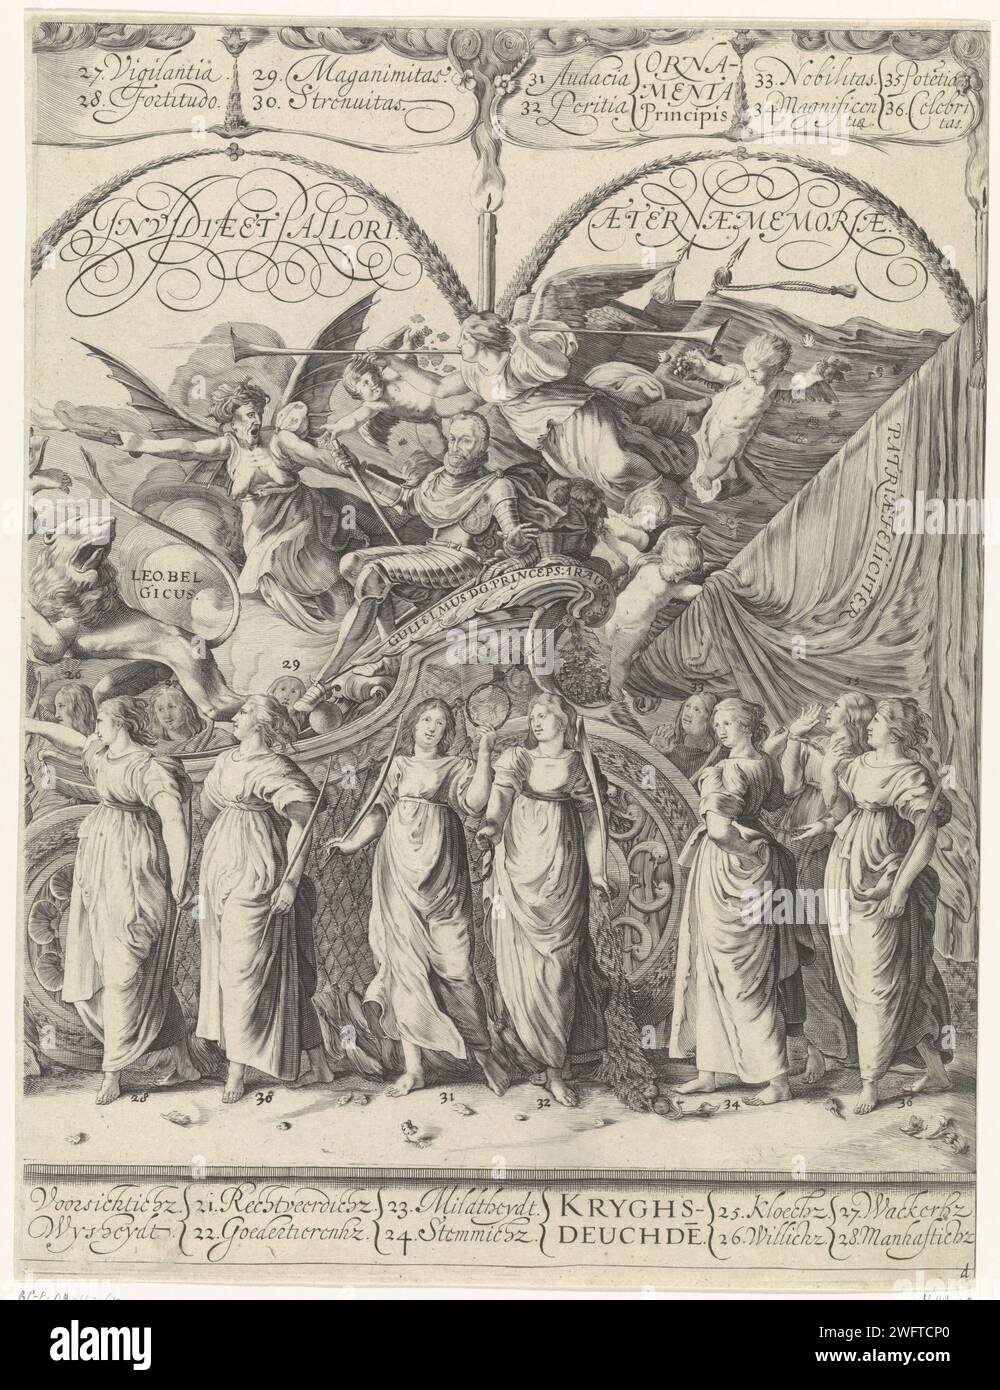 Triumphal trip of Willem van Oranje, courts, Cornelis van Kittensteyn, after Willem Pietersz Buytewech, 1626 print Plate rights of five albums of 'Triumphocht van Willem van Oranje' with symbolic representations of the virtues of Prince Willem van Oranje, consisting of: the Christian virtues, the government virtues and the warriors. The last two virtues are central in this print. In the middle of the image, the harnessed Willem van Oranje and the Dutch Lion (Leo Belgicus) are depicted on a triumphal wagon with large flags. Fly around the car, putti, fame and the envy with her snakesharen. The Stock Photo